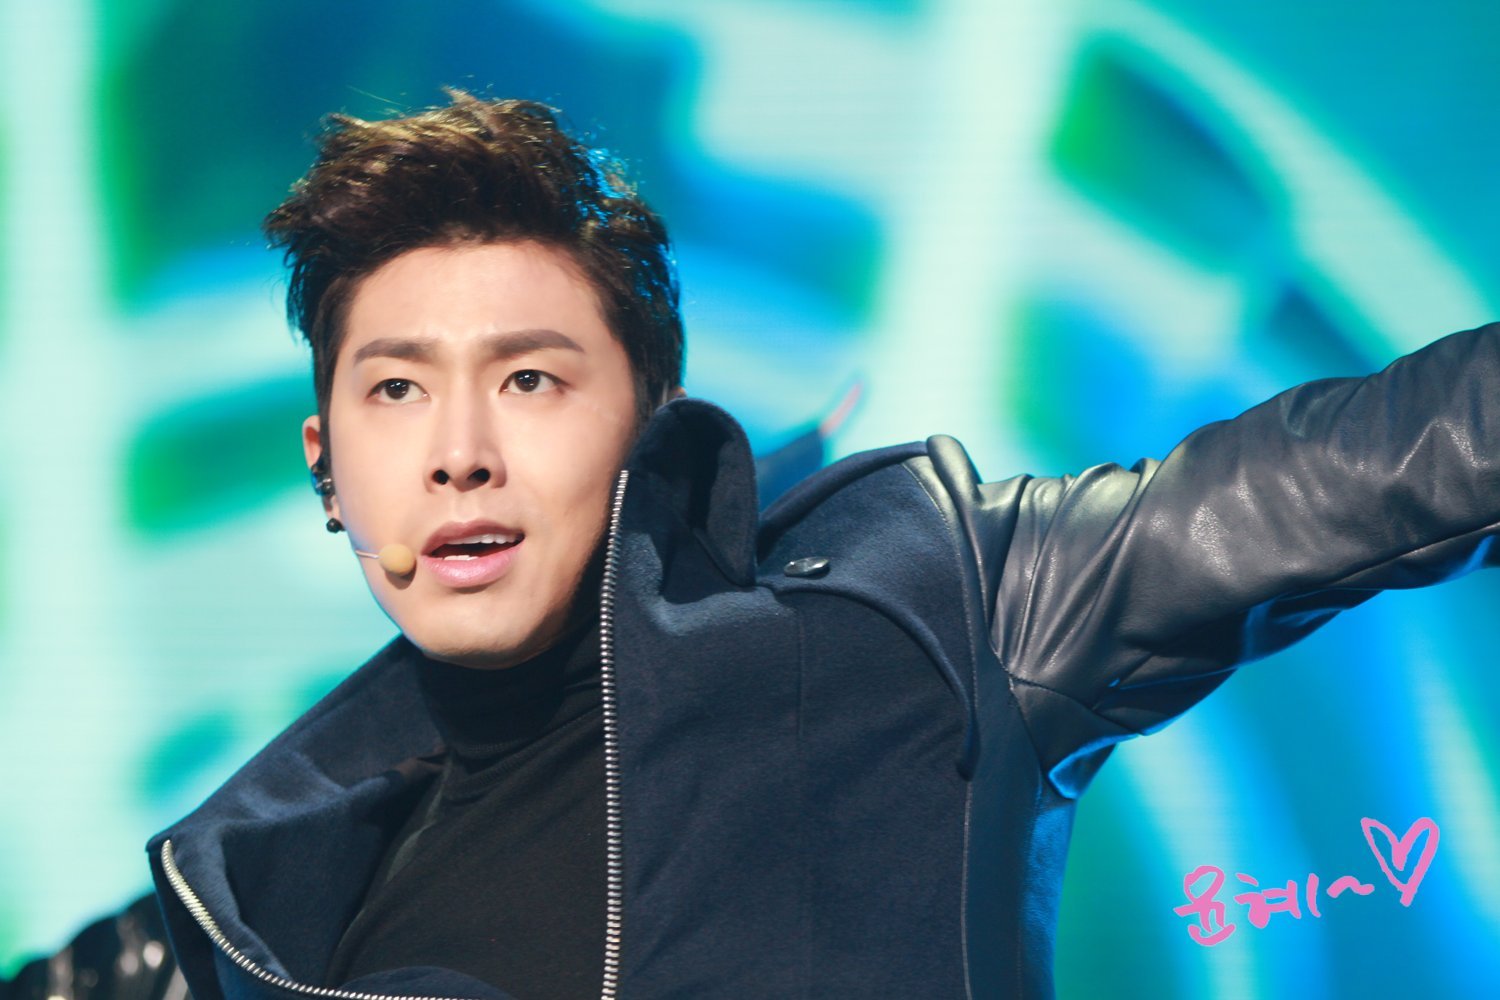 [21.12.12][Pics] Yunho - KBS Music Bank Year End Christmas Special A738e4628c4fa3d8e3e48add9a02ef8d_YJwJAOZ9x